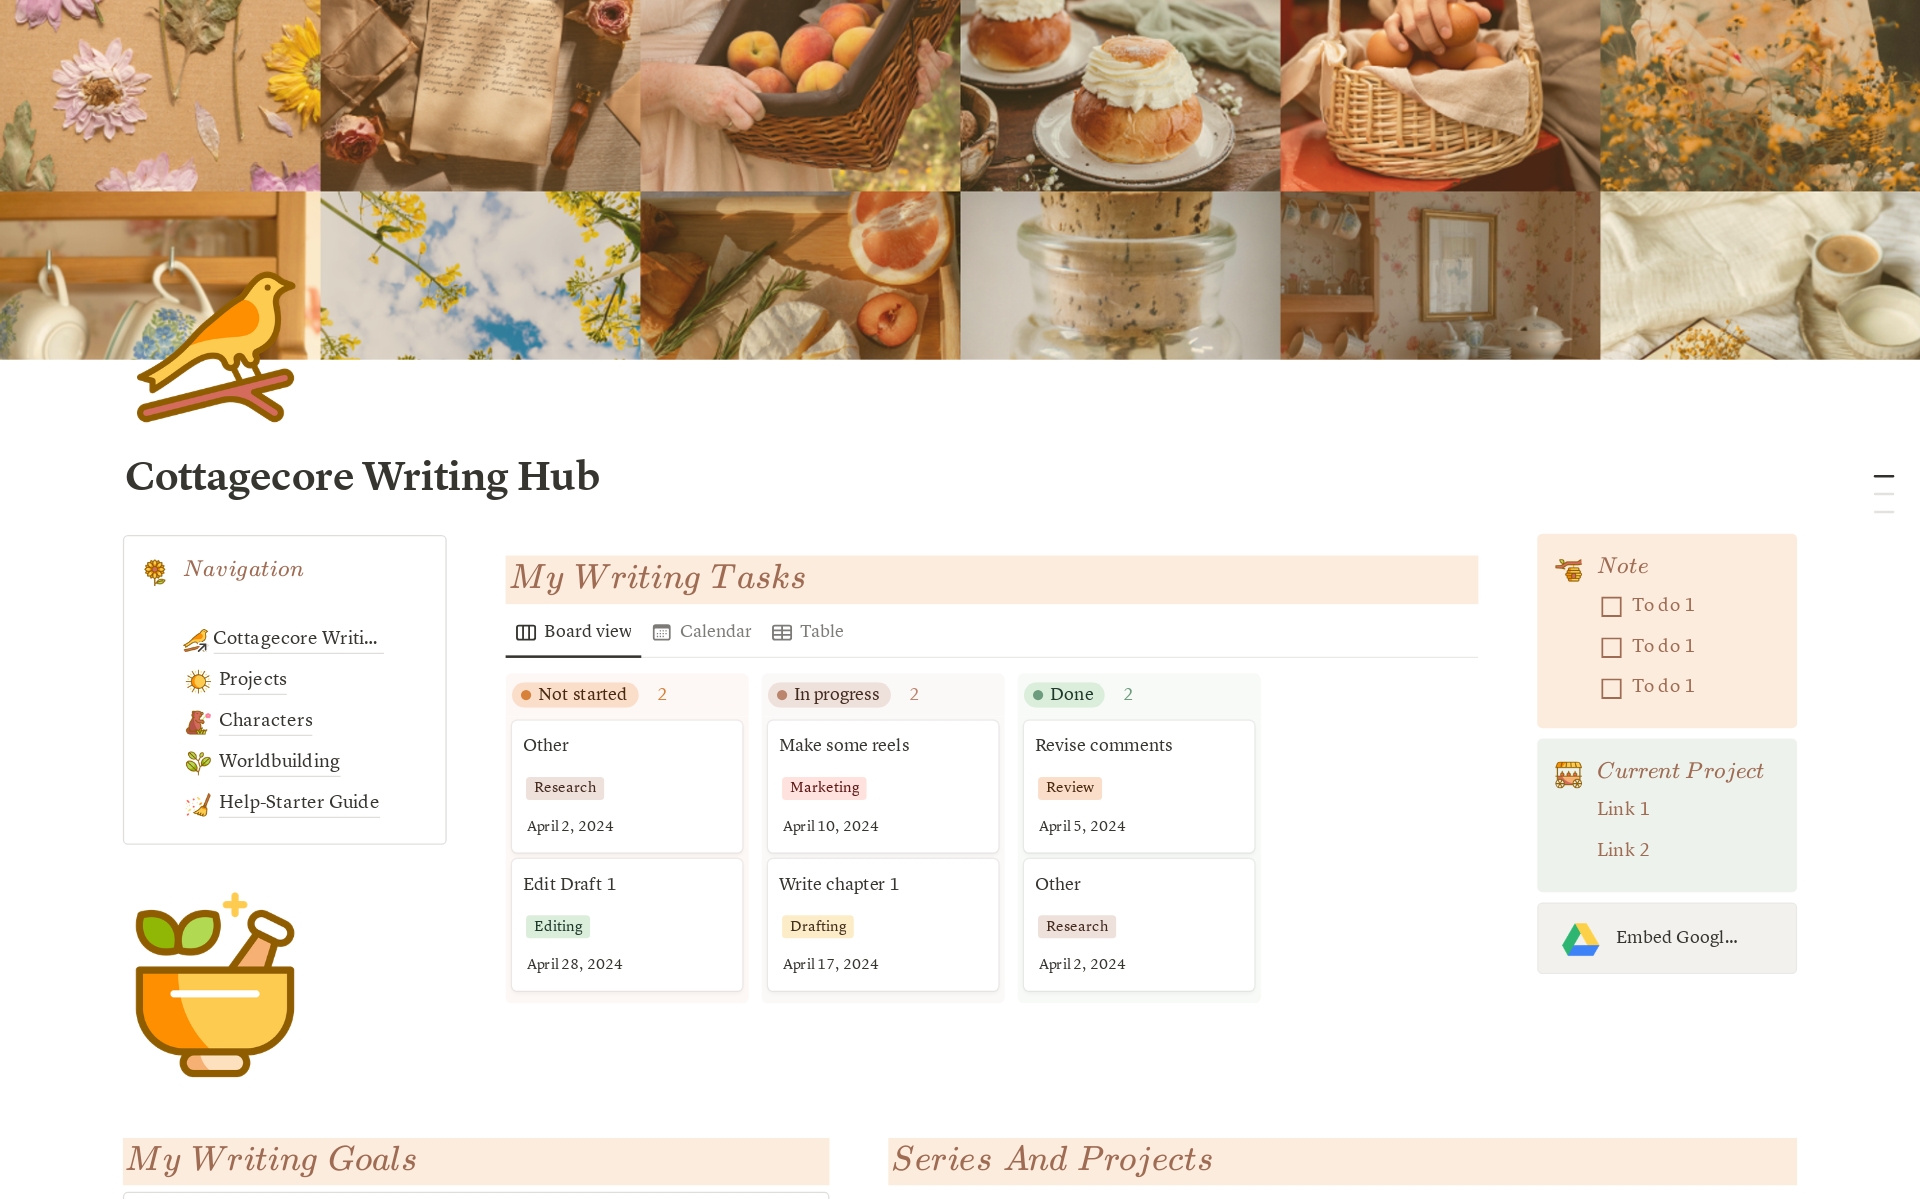 🌟The Writing Hub is ideal for novel writers who love writing aesthetically and visualizing their projects.
✨ Scrivener Customization + Google Docs collaboration
📒 Project tracker + Character sheets + Worldbuilding Wiki + Time/Word counter & more
💛Made by a writer for writers
